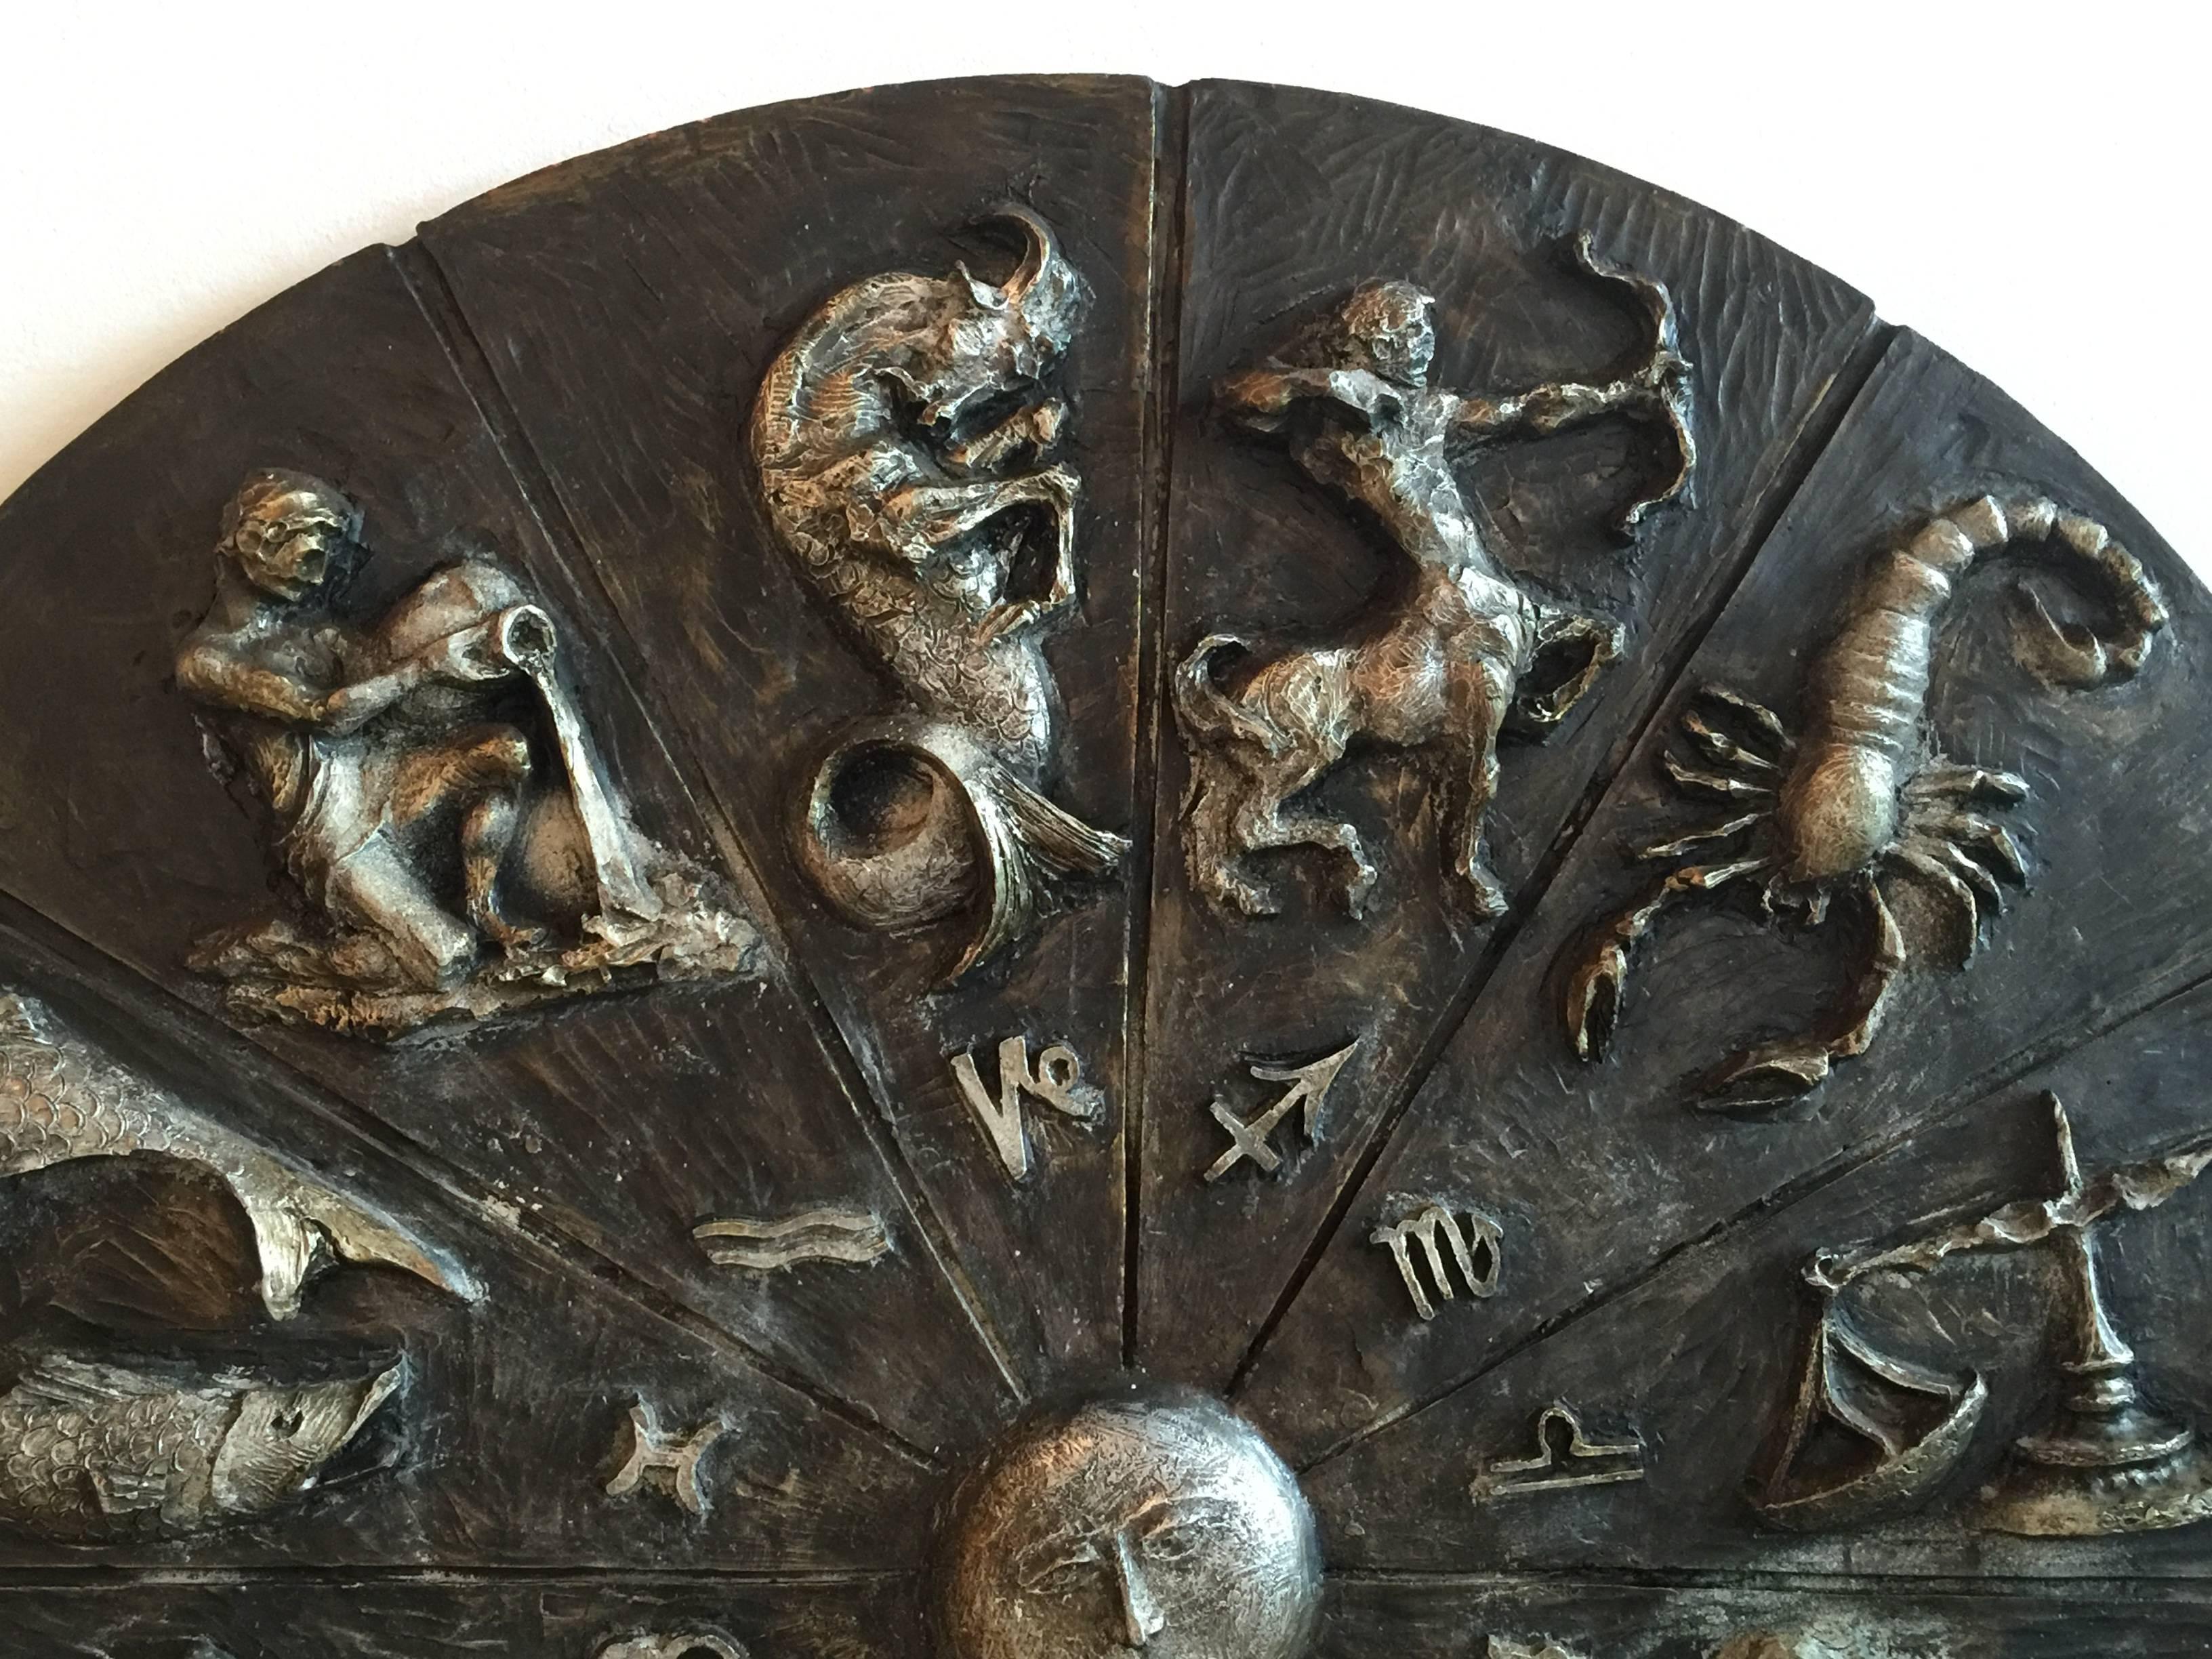 Vintage Brutalist monumental zodiac wall plaque, 1963 signed Seguso.
Mid-Century Modern, horoscope, astrology, astrological signs, circular, round,
The depth noted below accounts for the plaque only not the 3d dimensional effects of the signs.